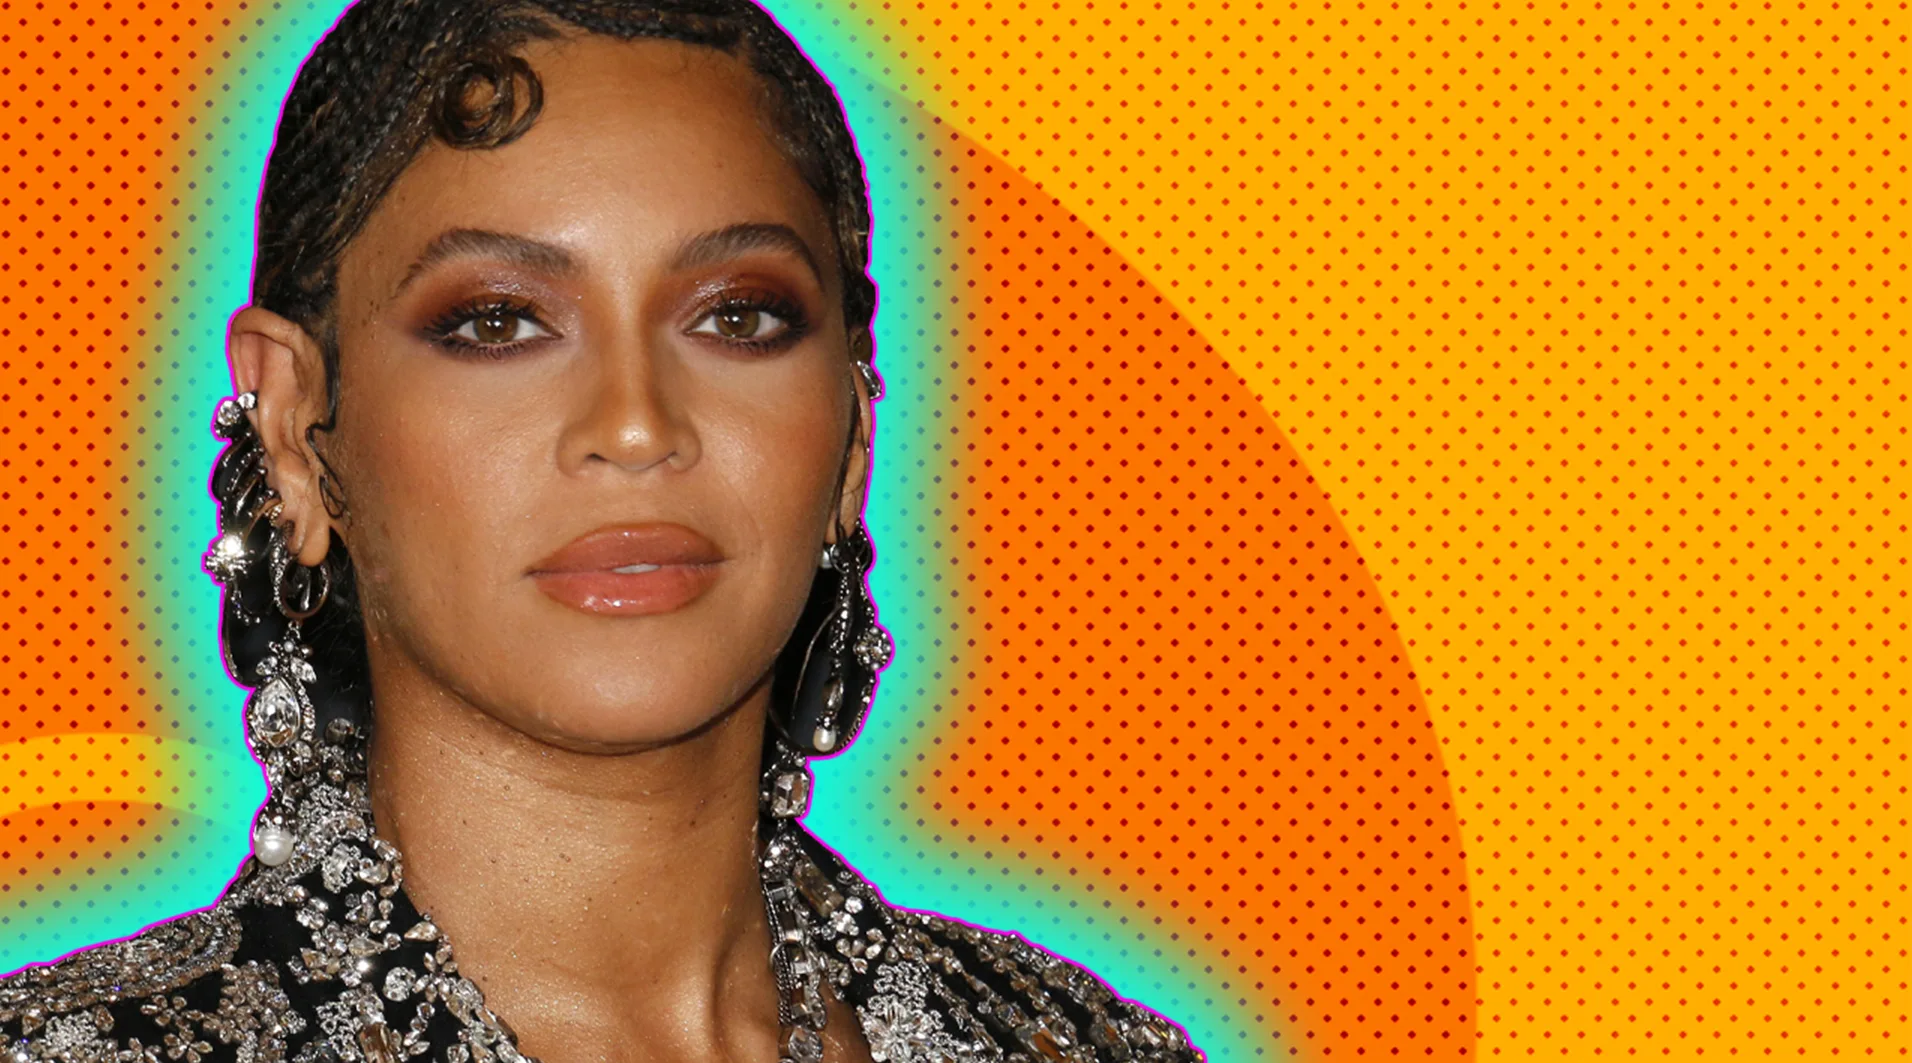 Beyonce at the premiere of Lion King, with a green glow around her on a orange spotty background